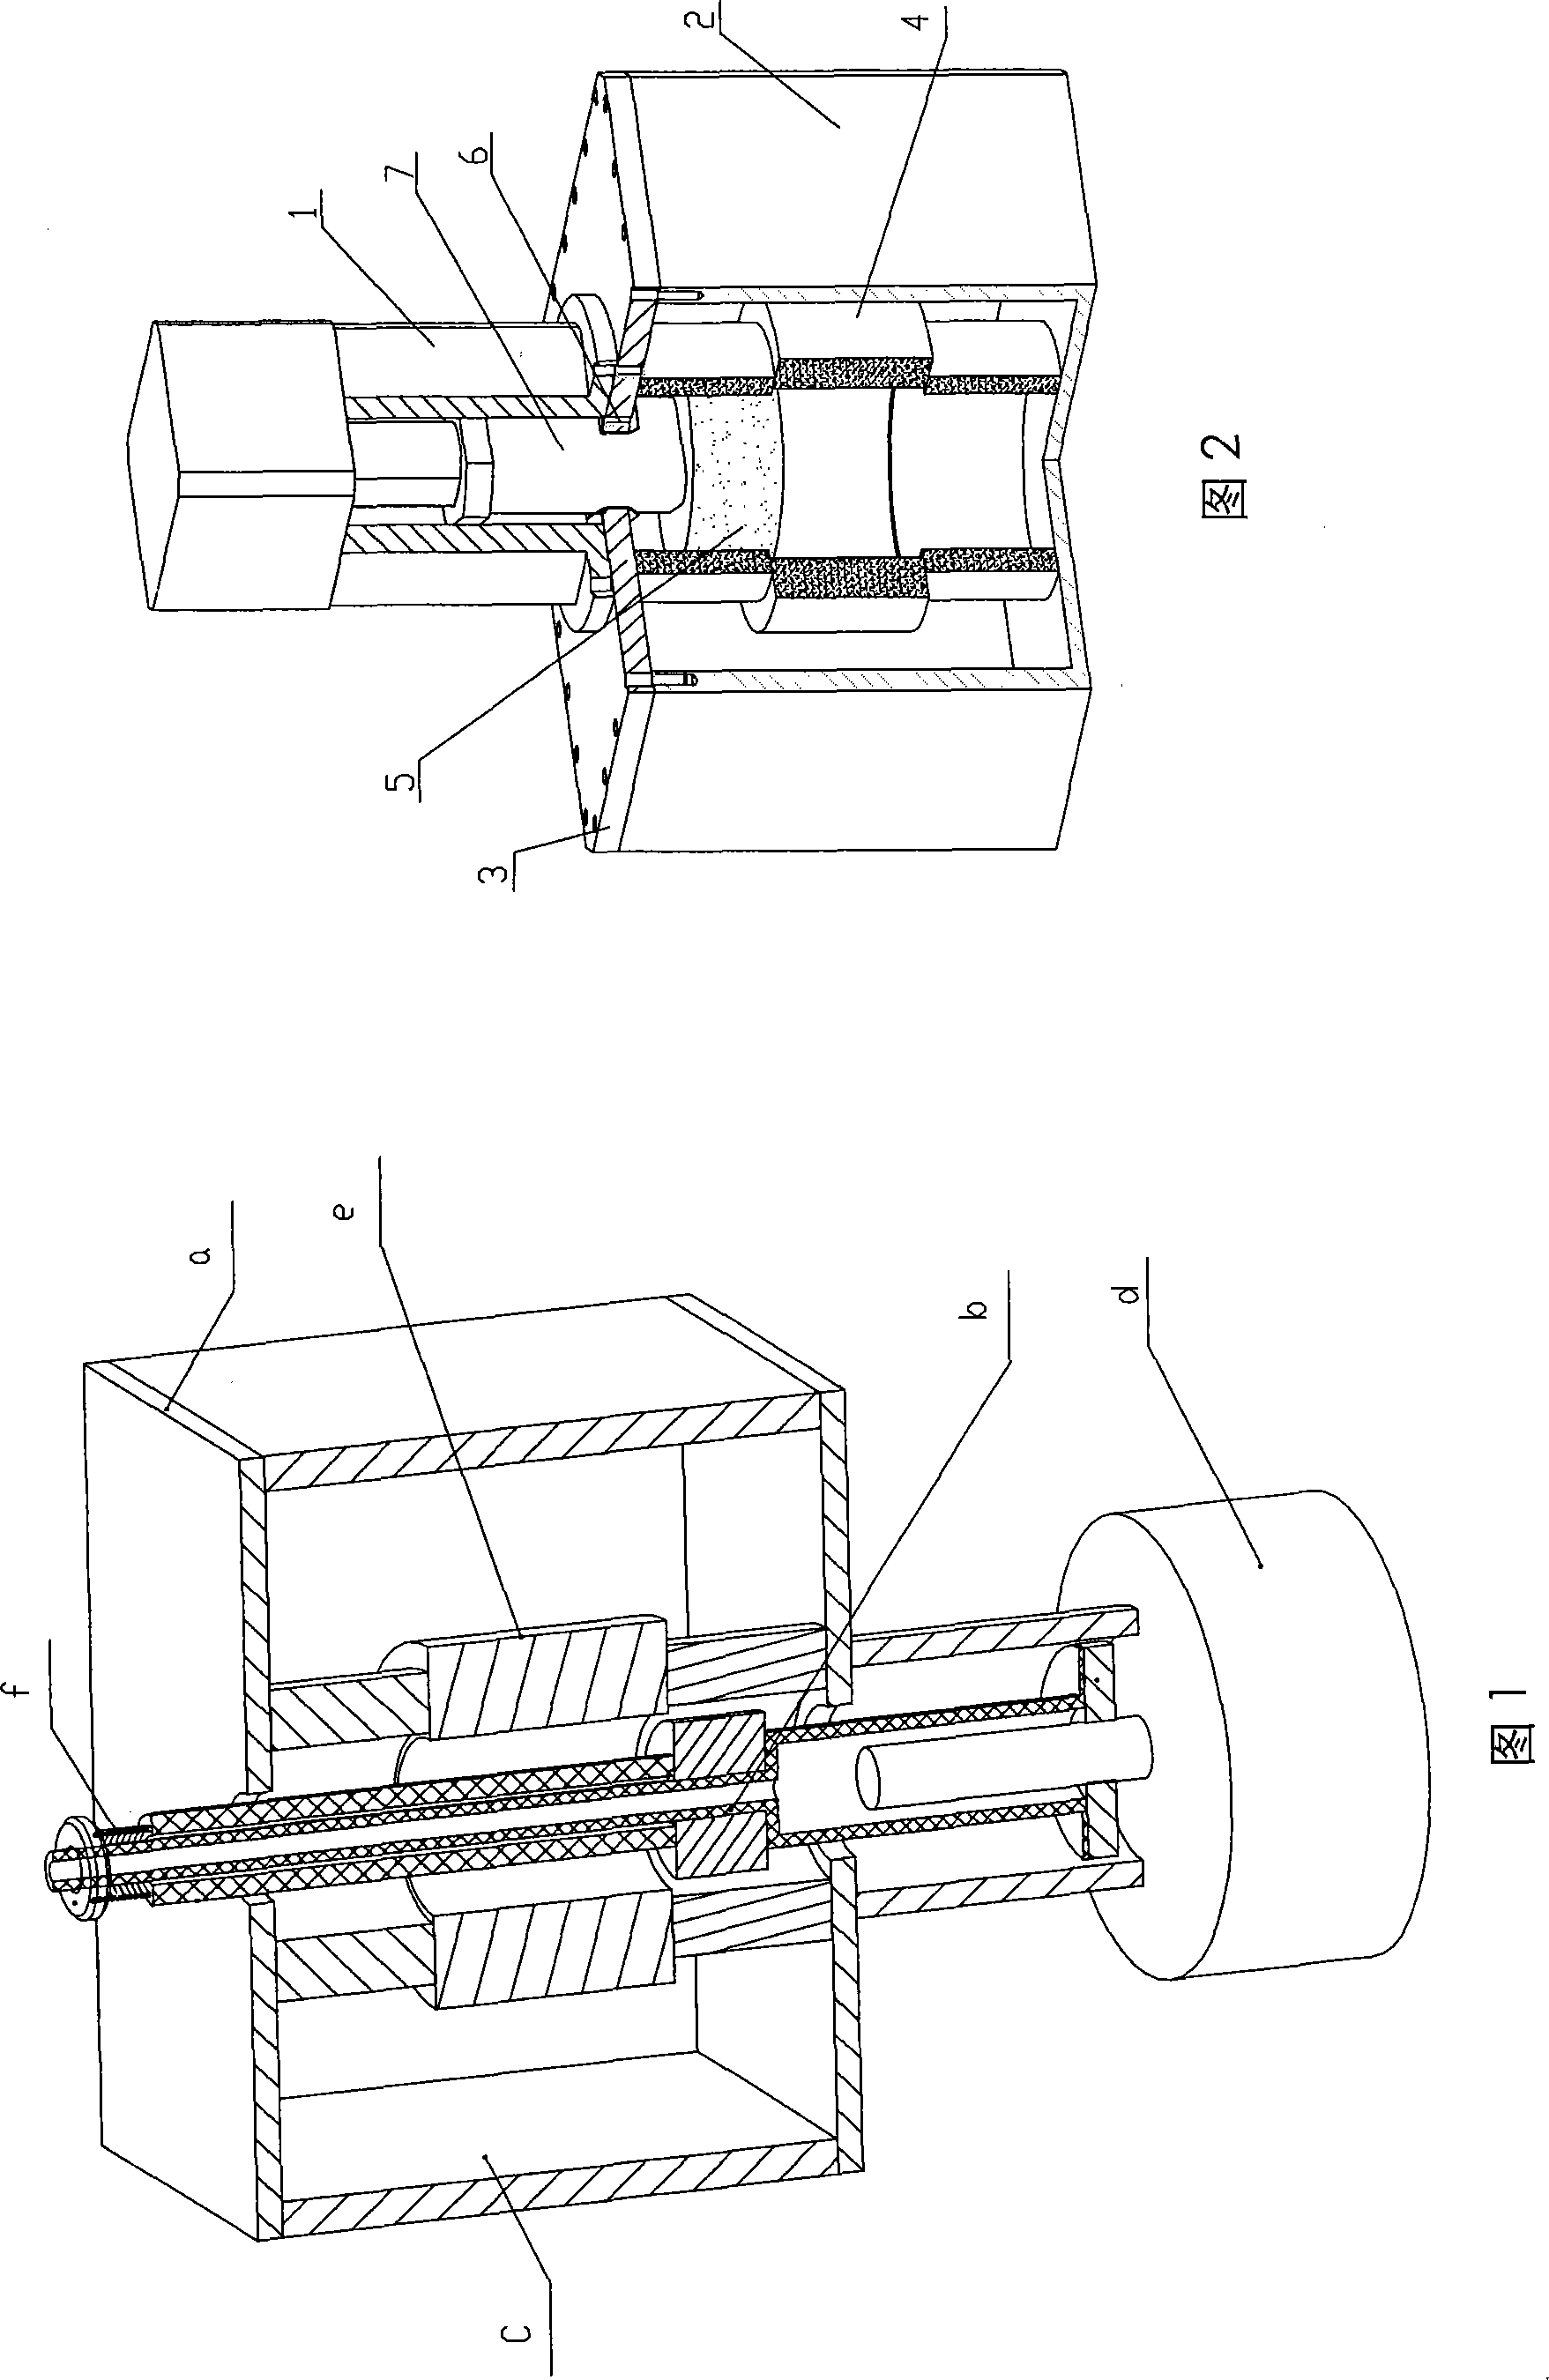 Cavity filter frequency adjustment mechanism